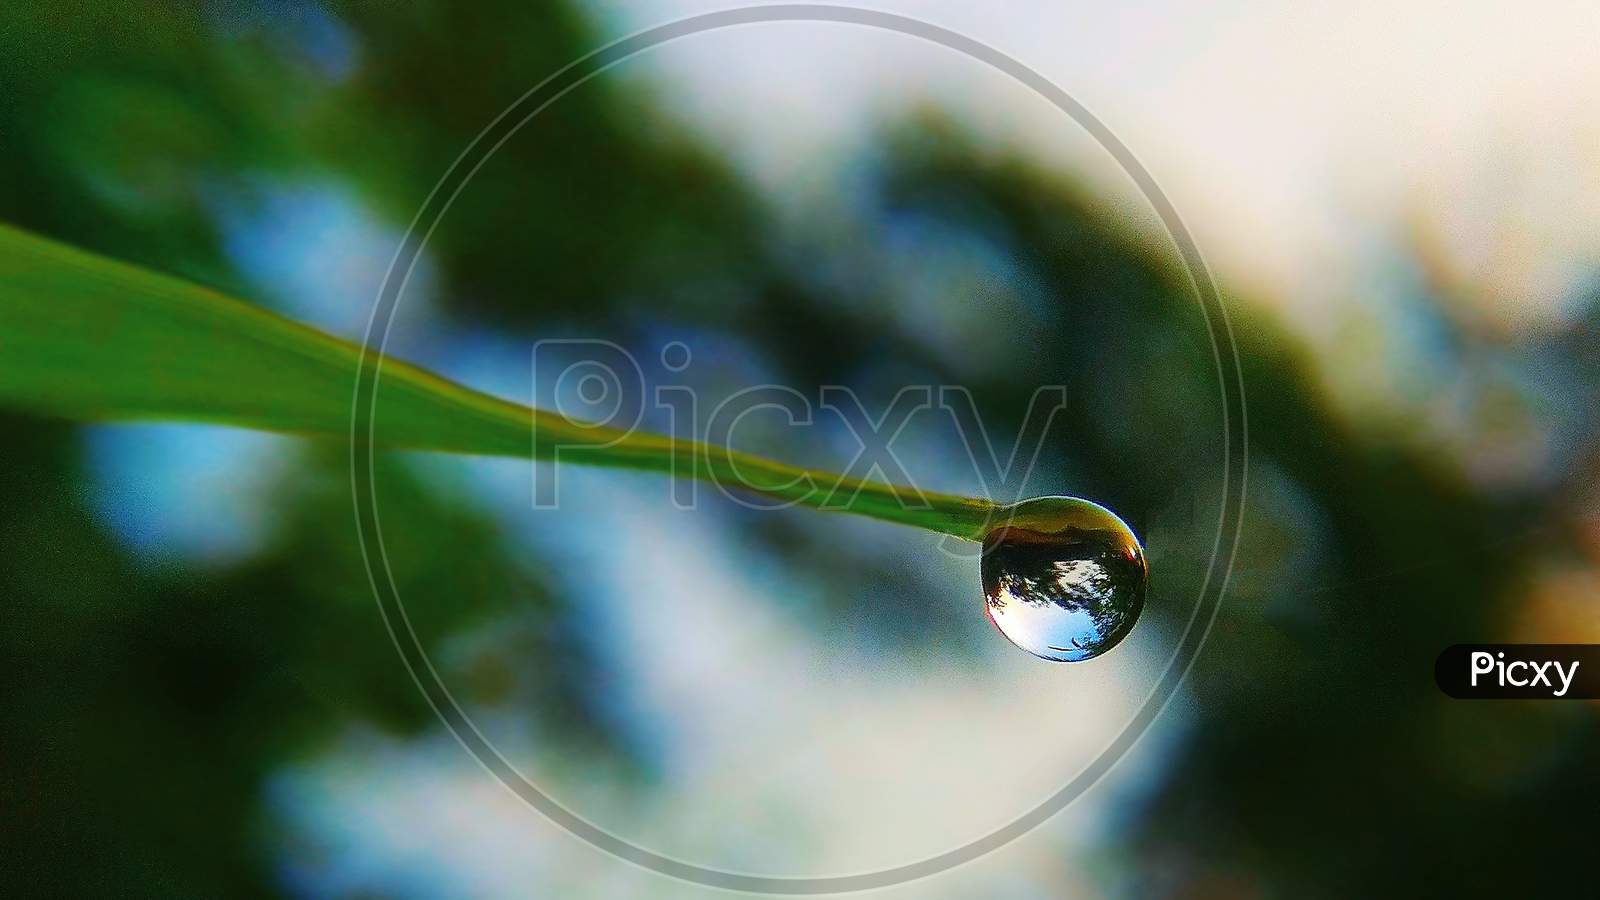 Dew drop on bamboo leaf grass atorning